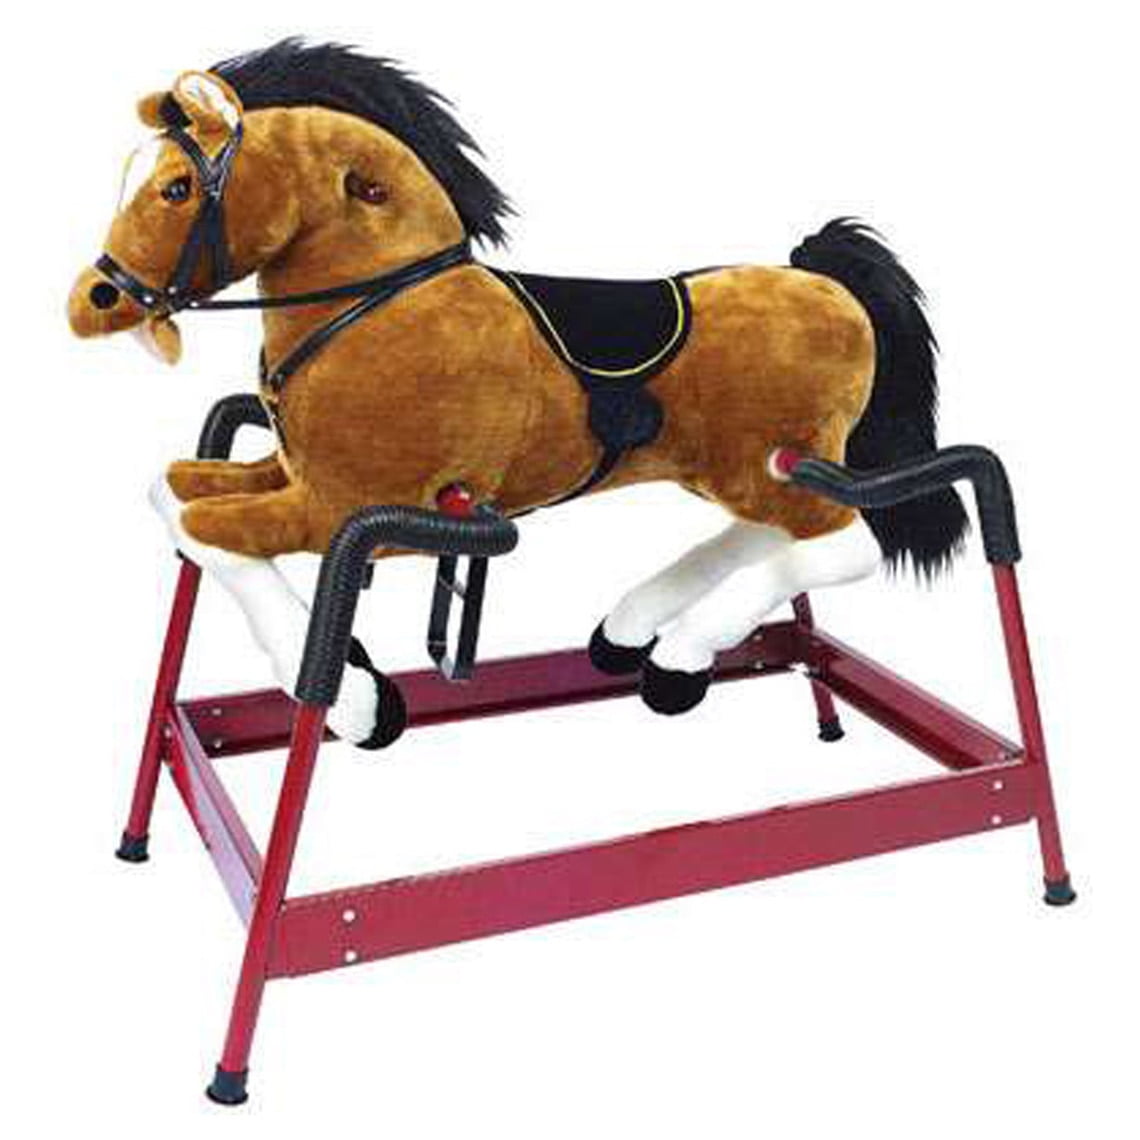 Radio Flyer 386Z Freckles Interactive Plush Riding Horse White and Brown for sale online 